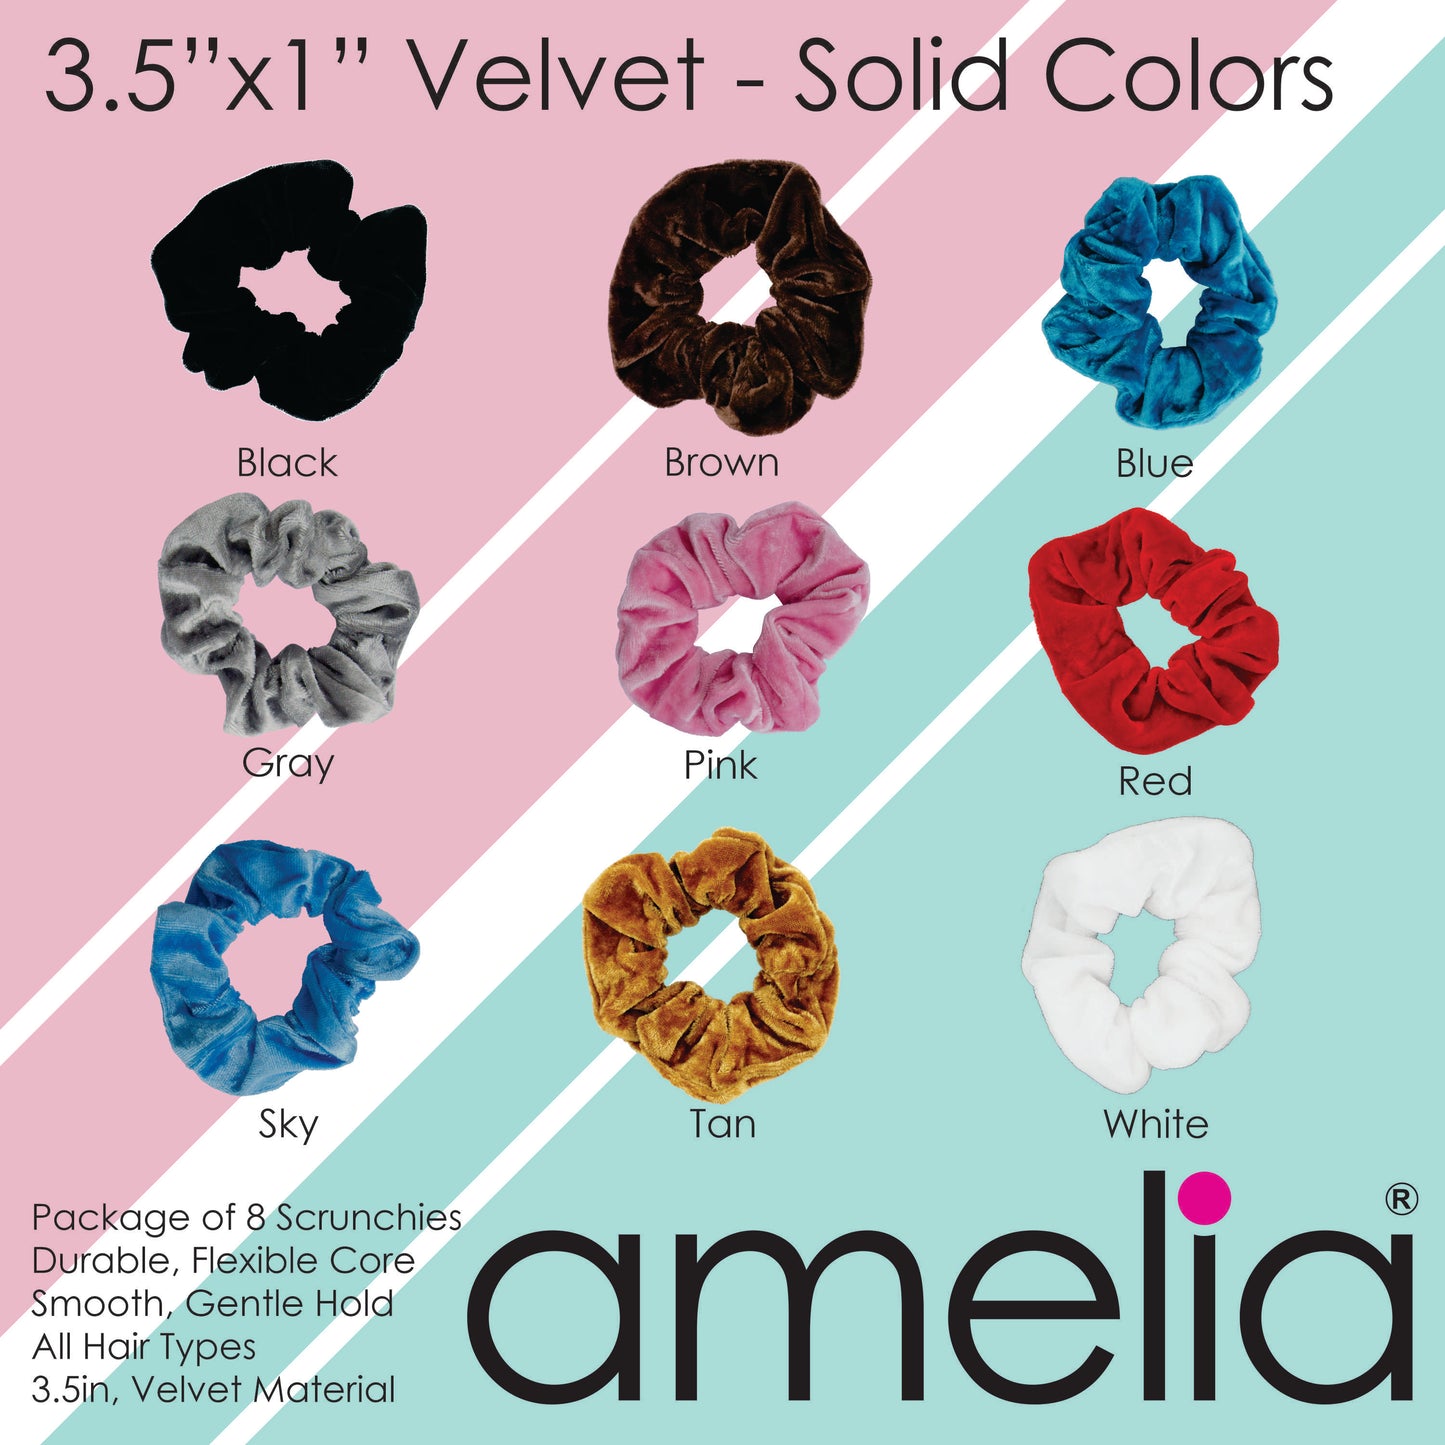 Amelia Beauty, Brown Velvet Scrunchies, 3.5in Diameter, Gentle on Hair, Strong Hold, No Snag, No Dents or Creases. 8 Pack